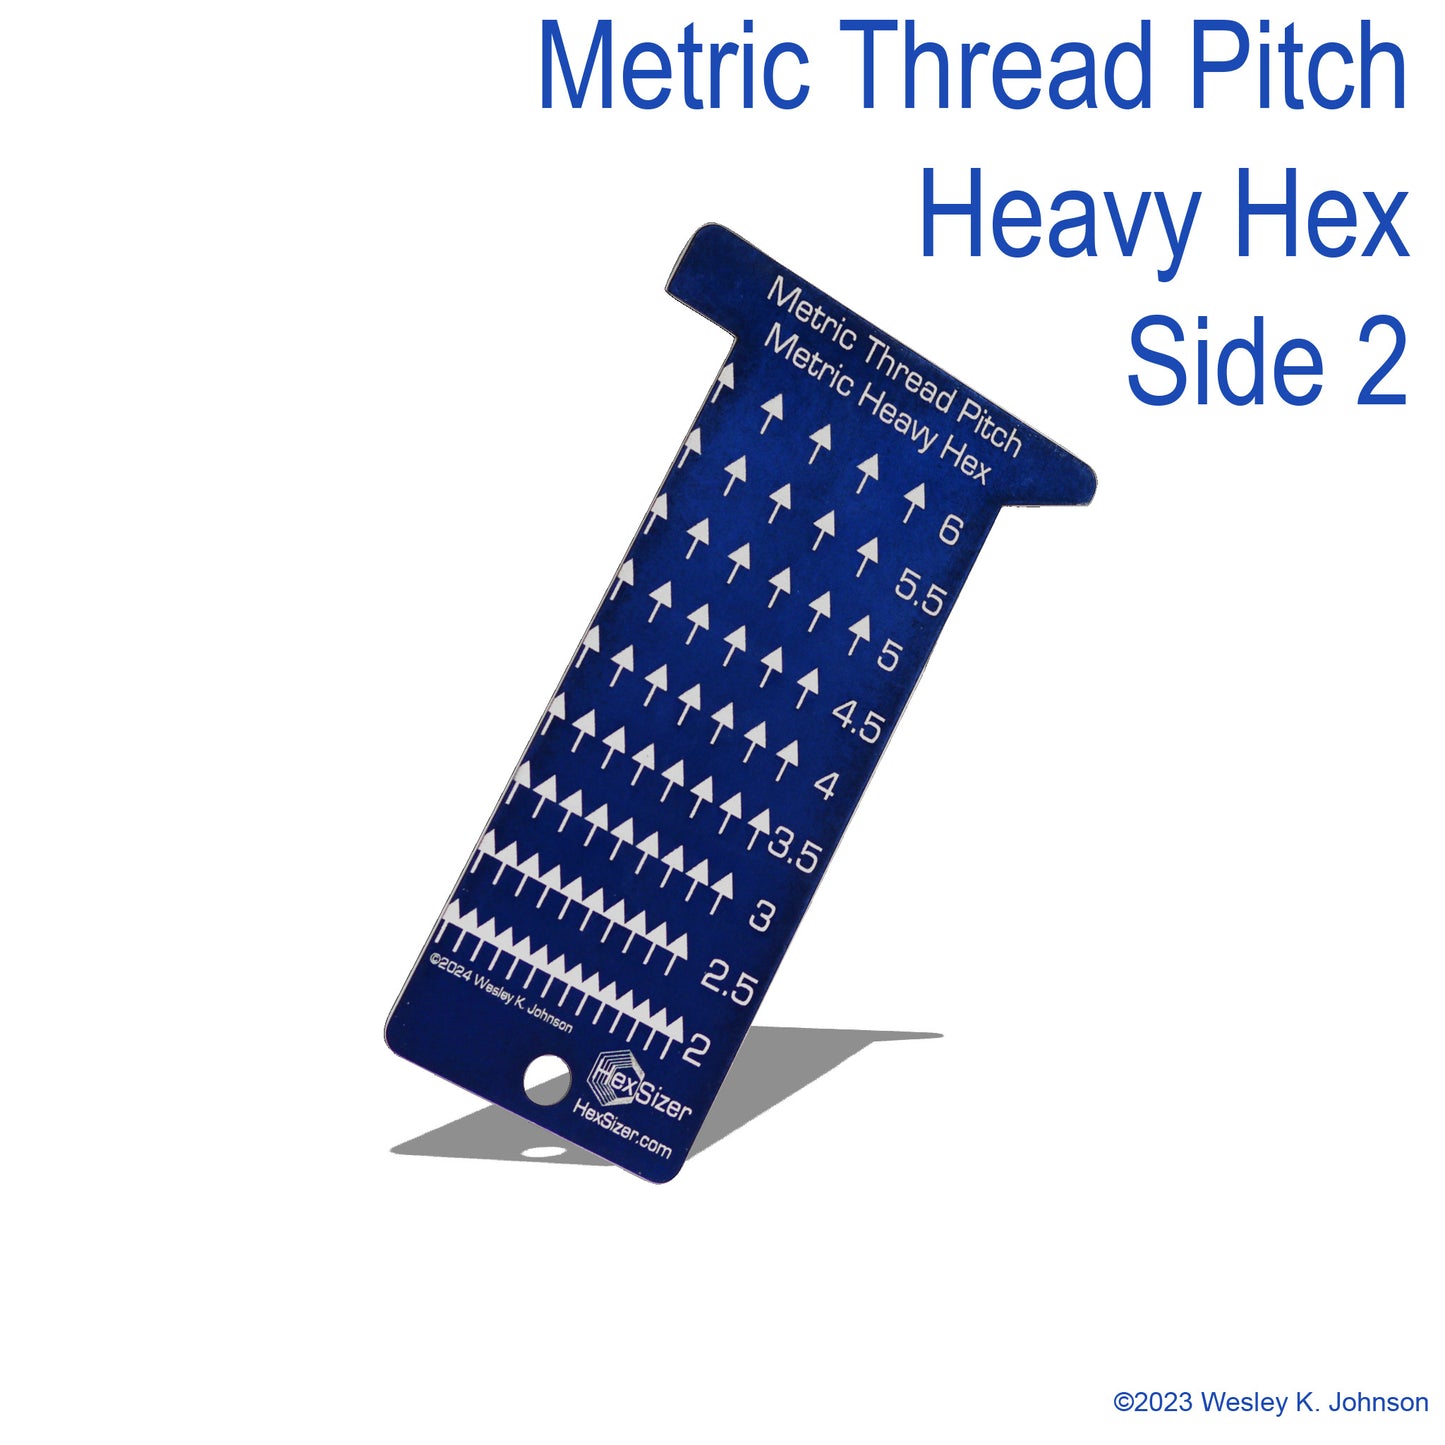 Thread, Nut, and Stud Bolt size for Heavy Hex Sizes - Metric